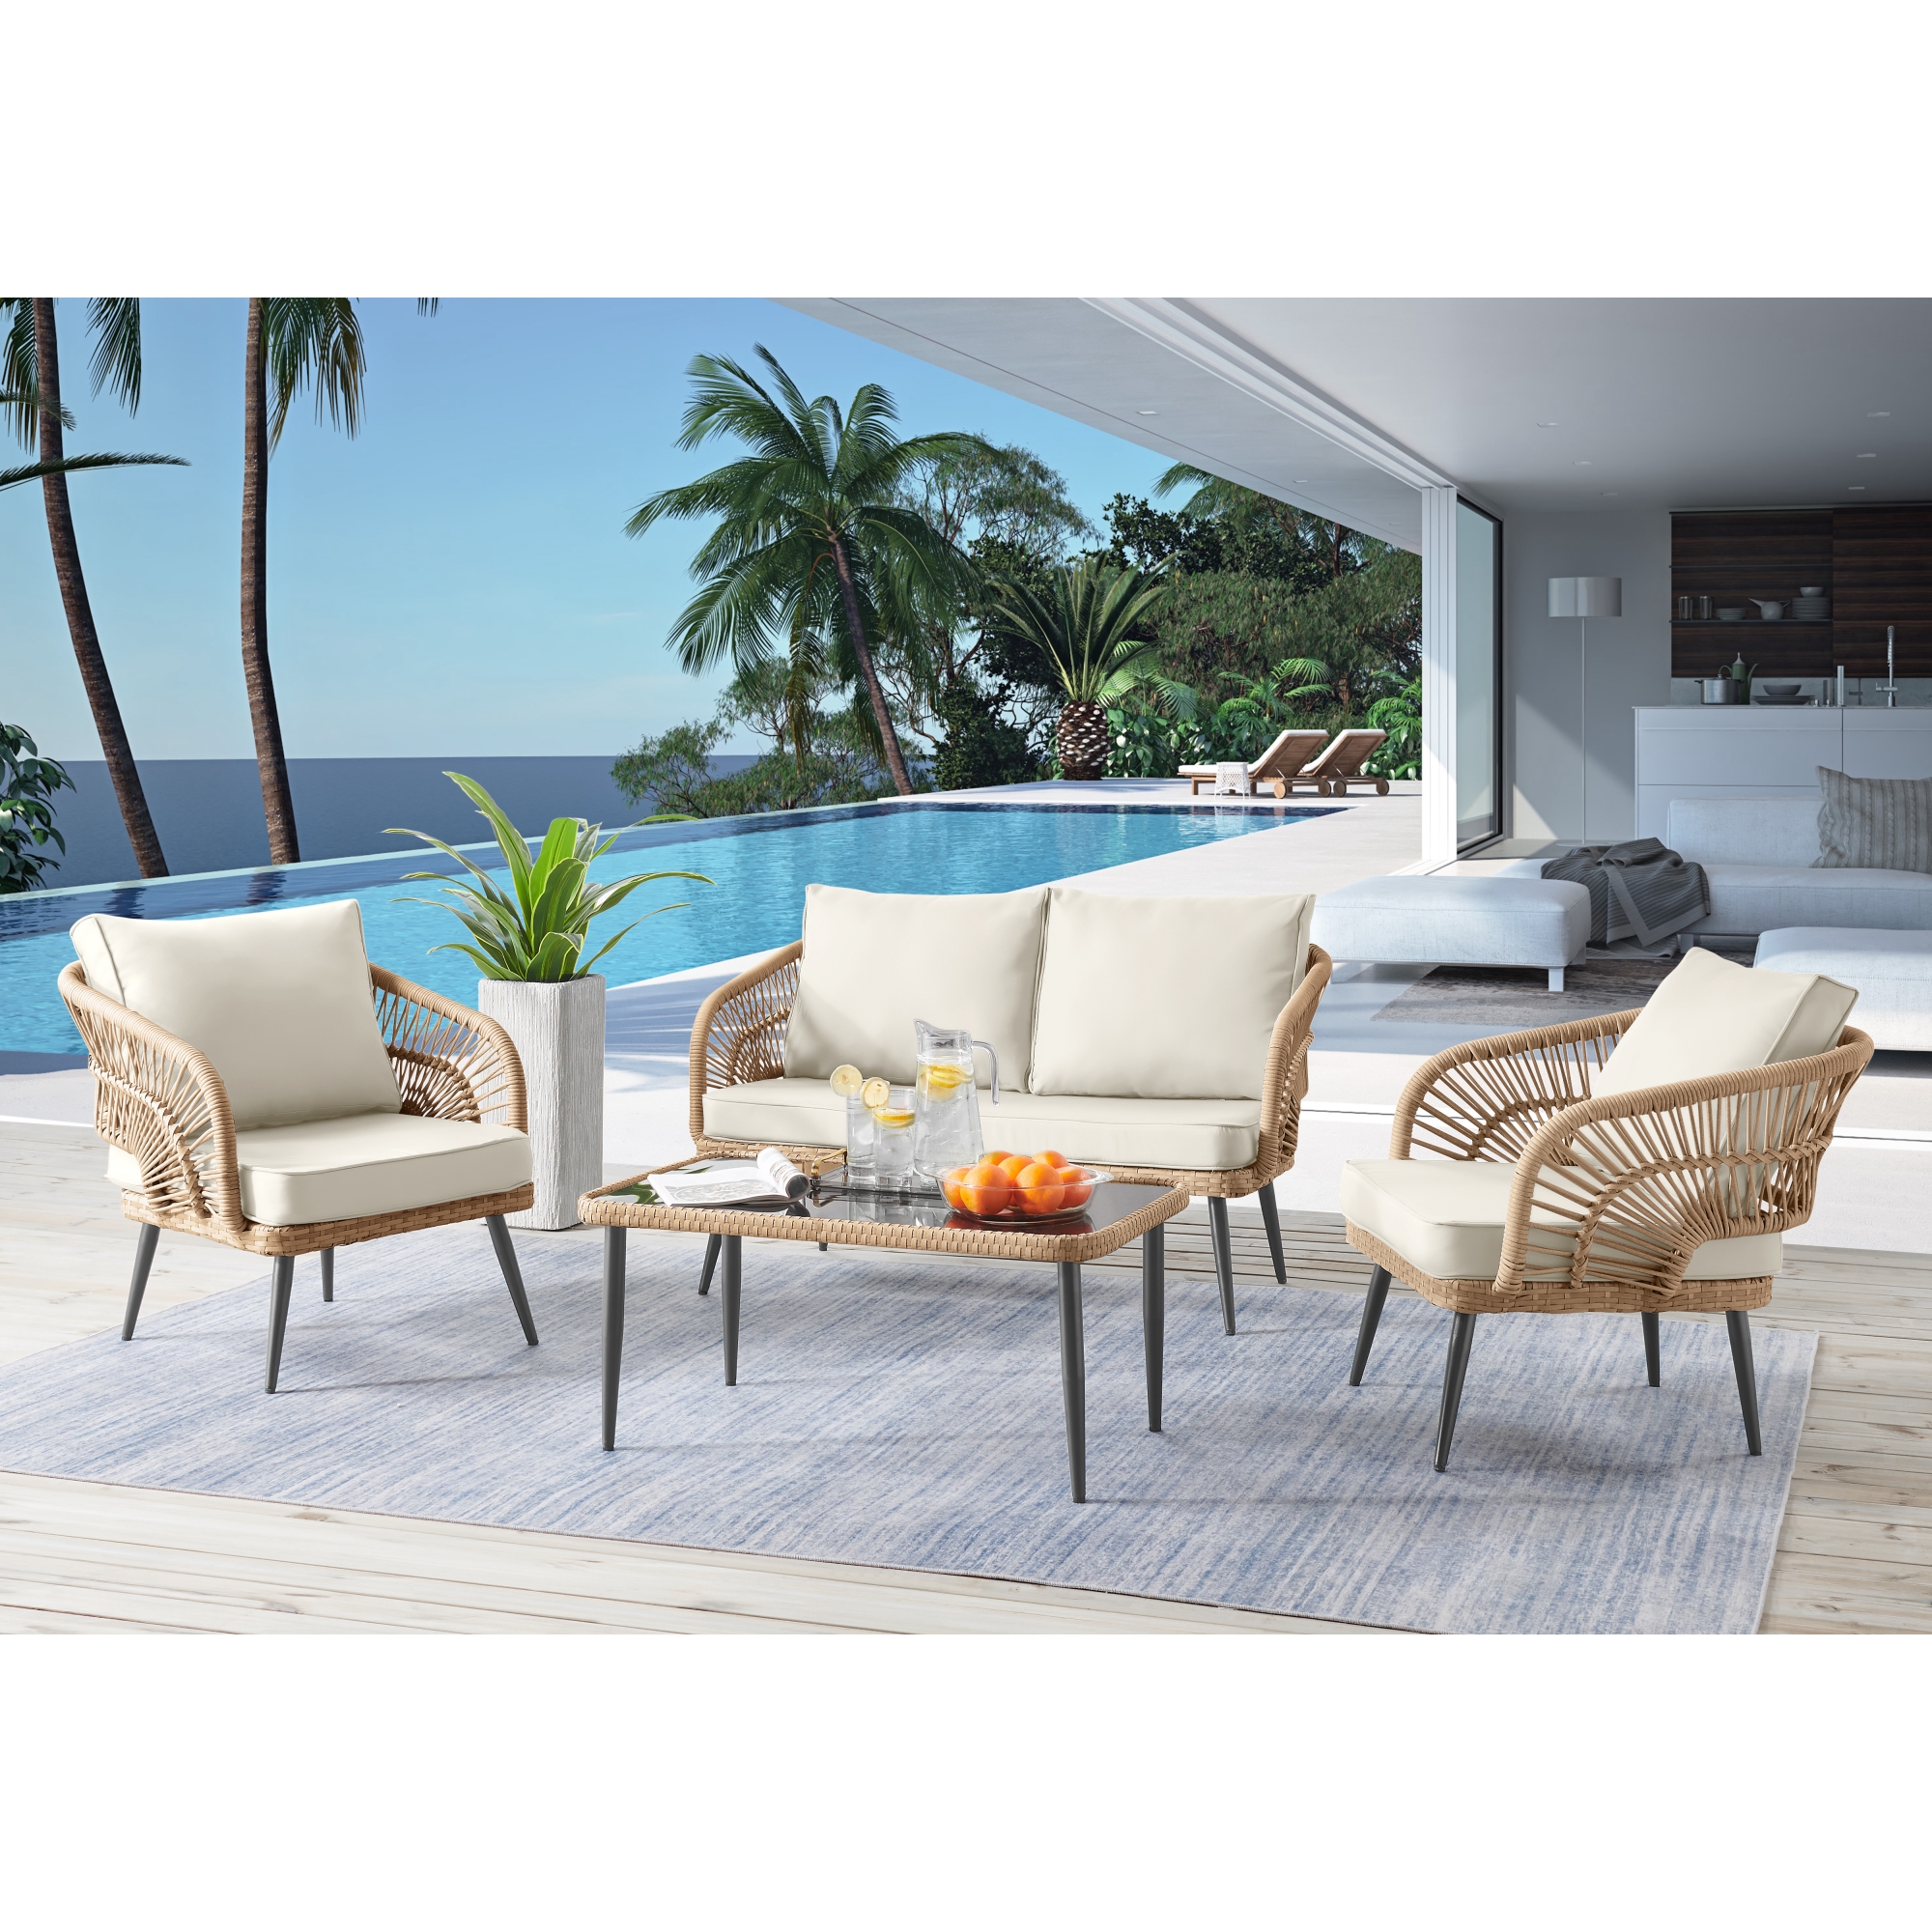 Inspired Home Sylis Outdoor 4pc Seating Group Set: 1 Sofa, 2 Armchairs,1 Coffee Table,Rattan,Washable Cushions,UV Resistant,Teak